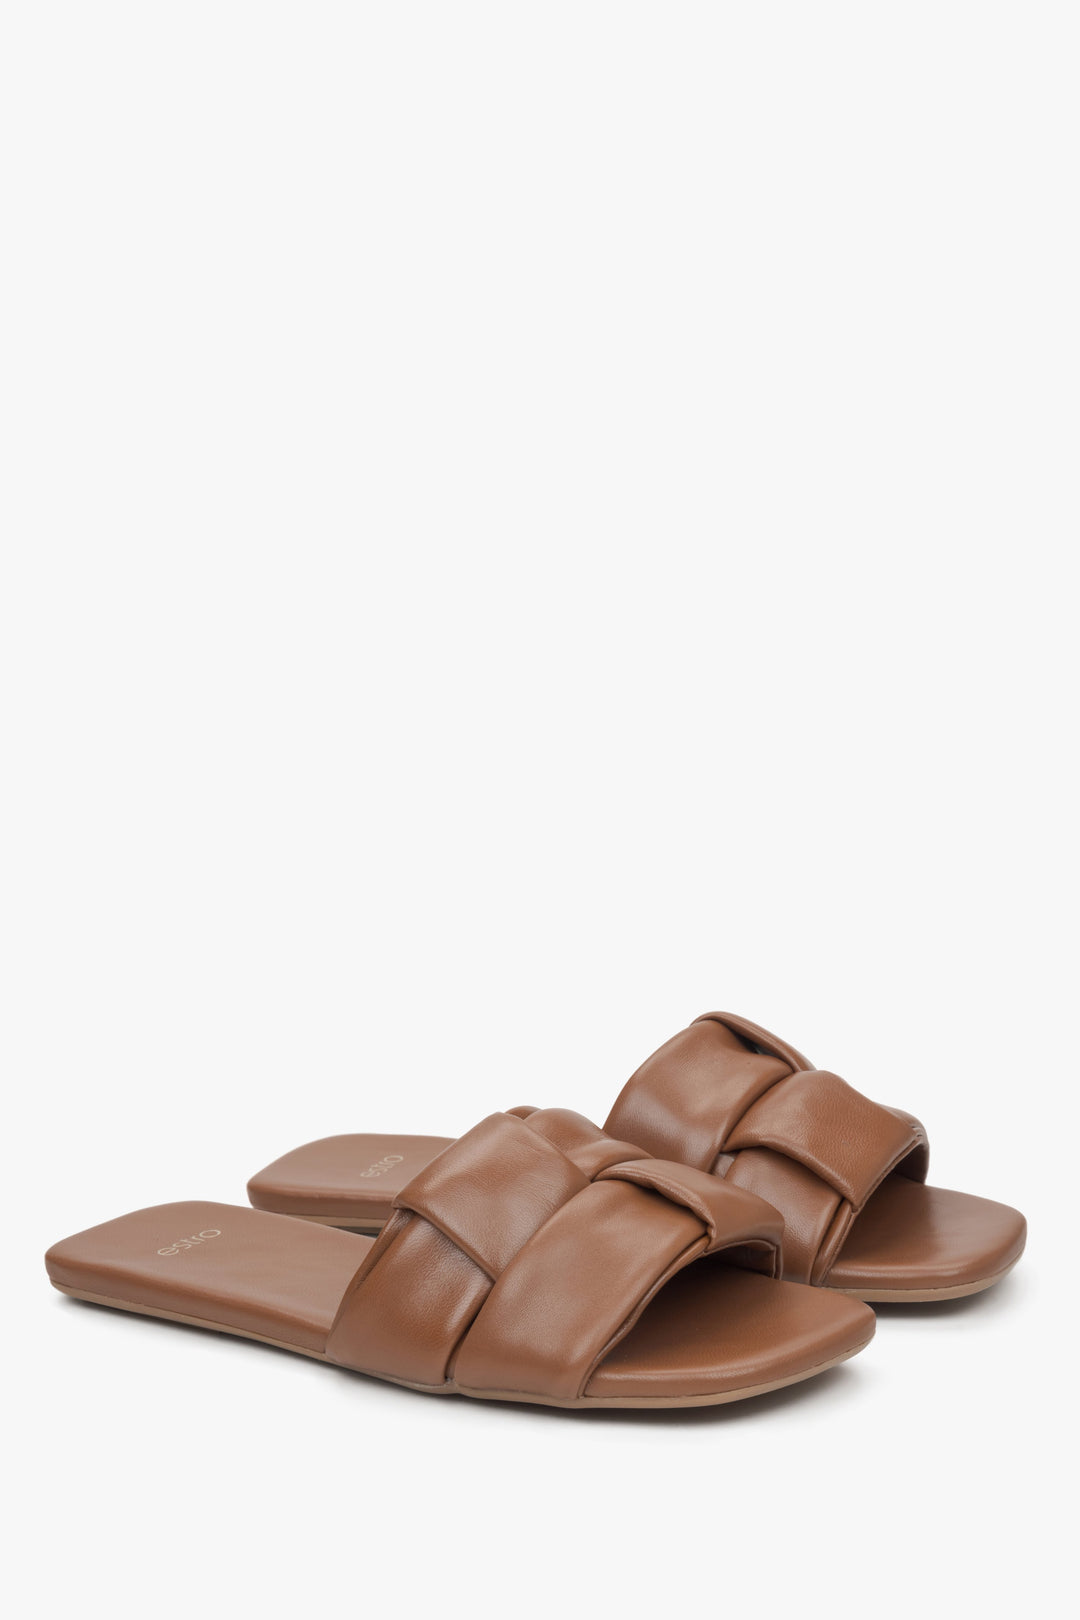 Slide Sandals for Women in Brown Patch Leather